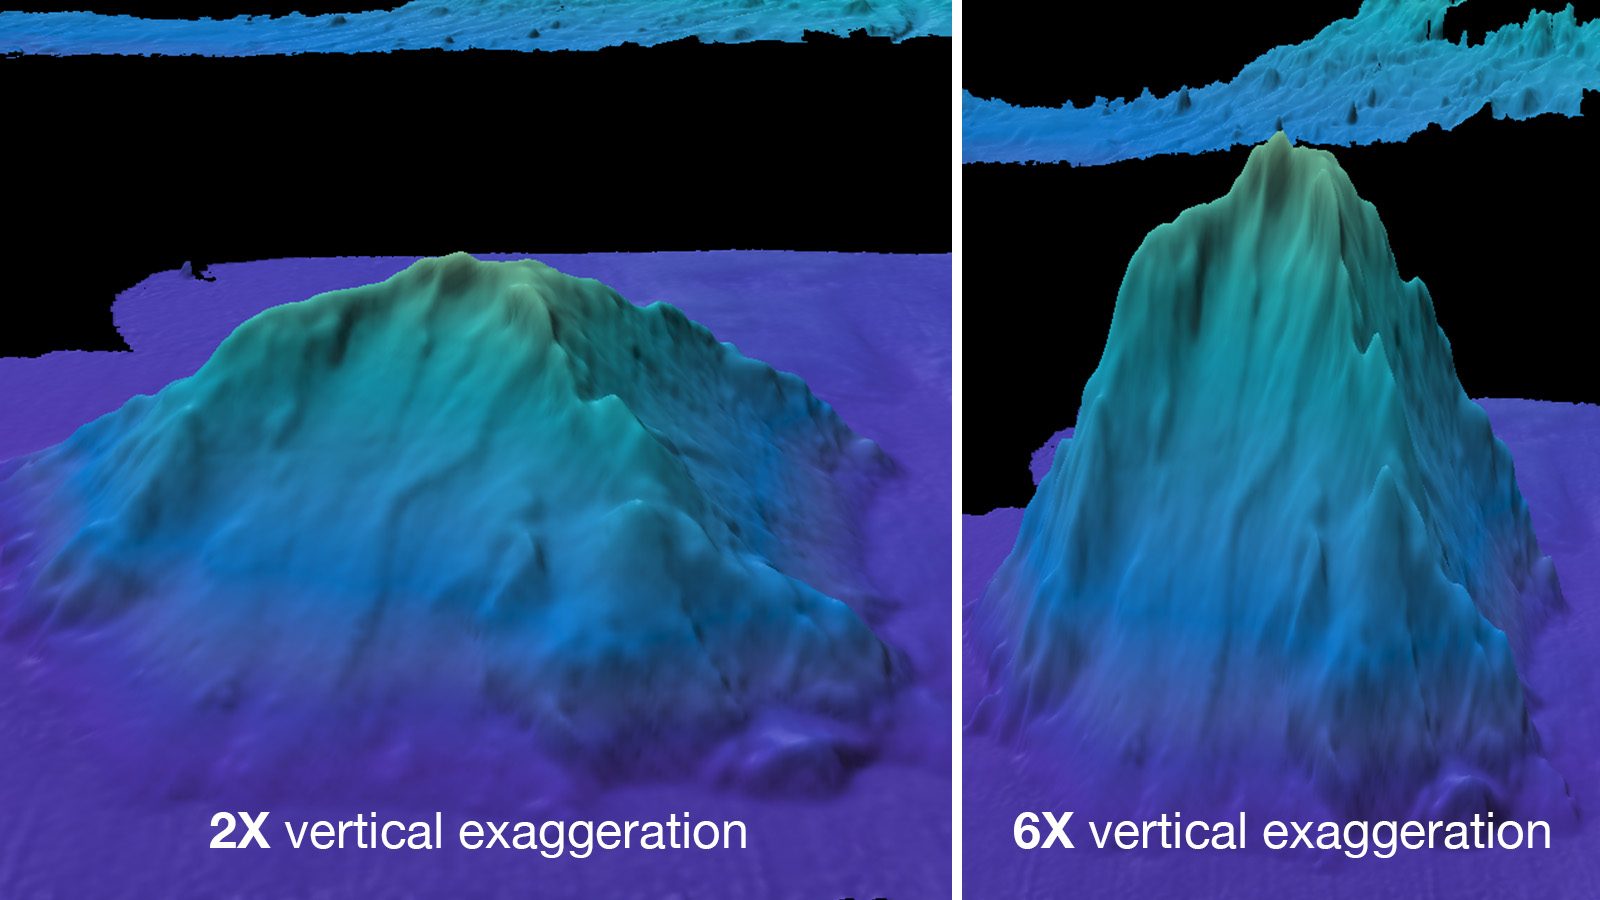 Side-by-side images of the same seamount above with a much steeper-looking incline and more detail visible on the ridges as the vertical exaggeration increases.